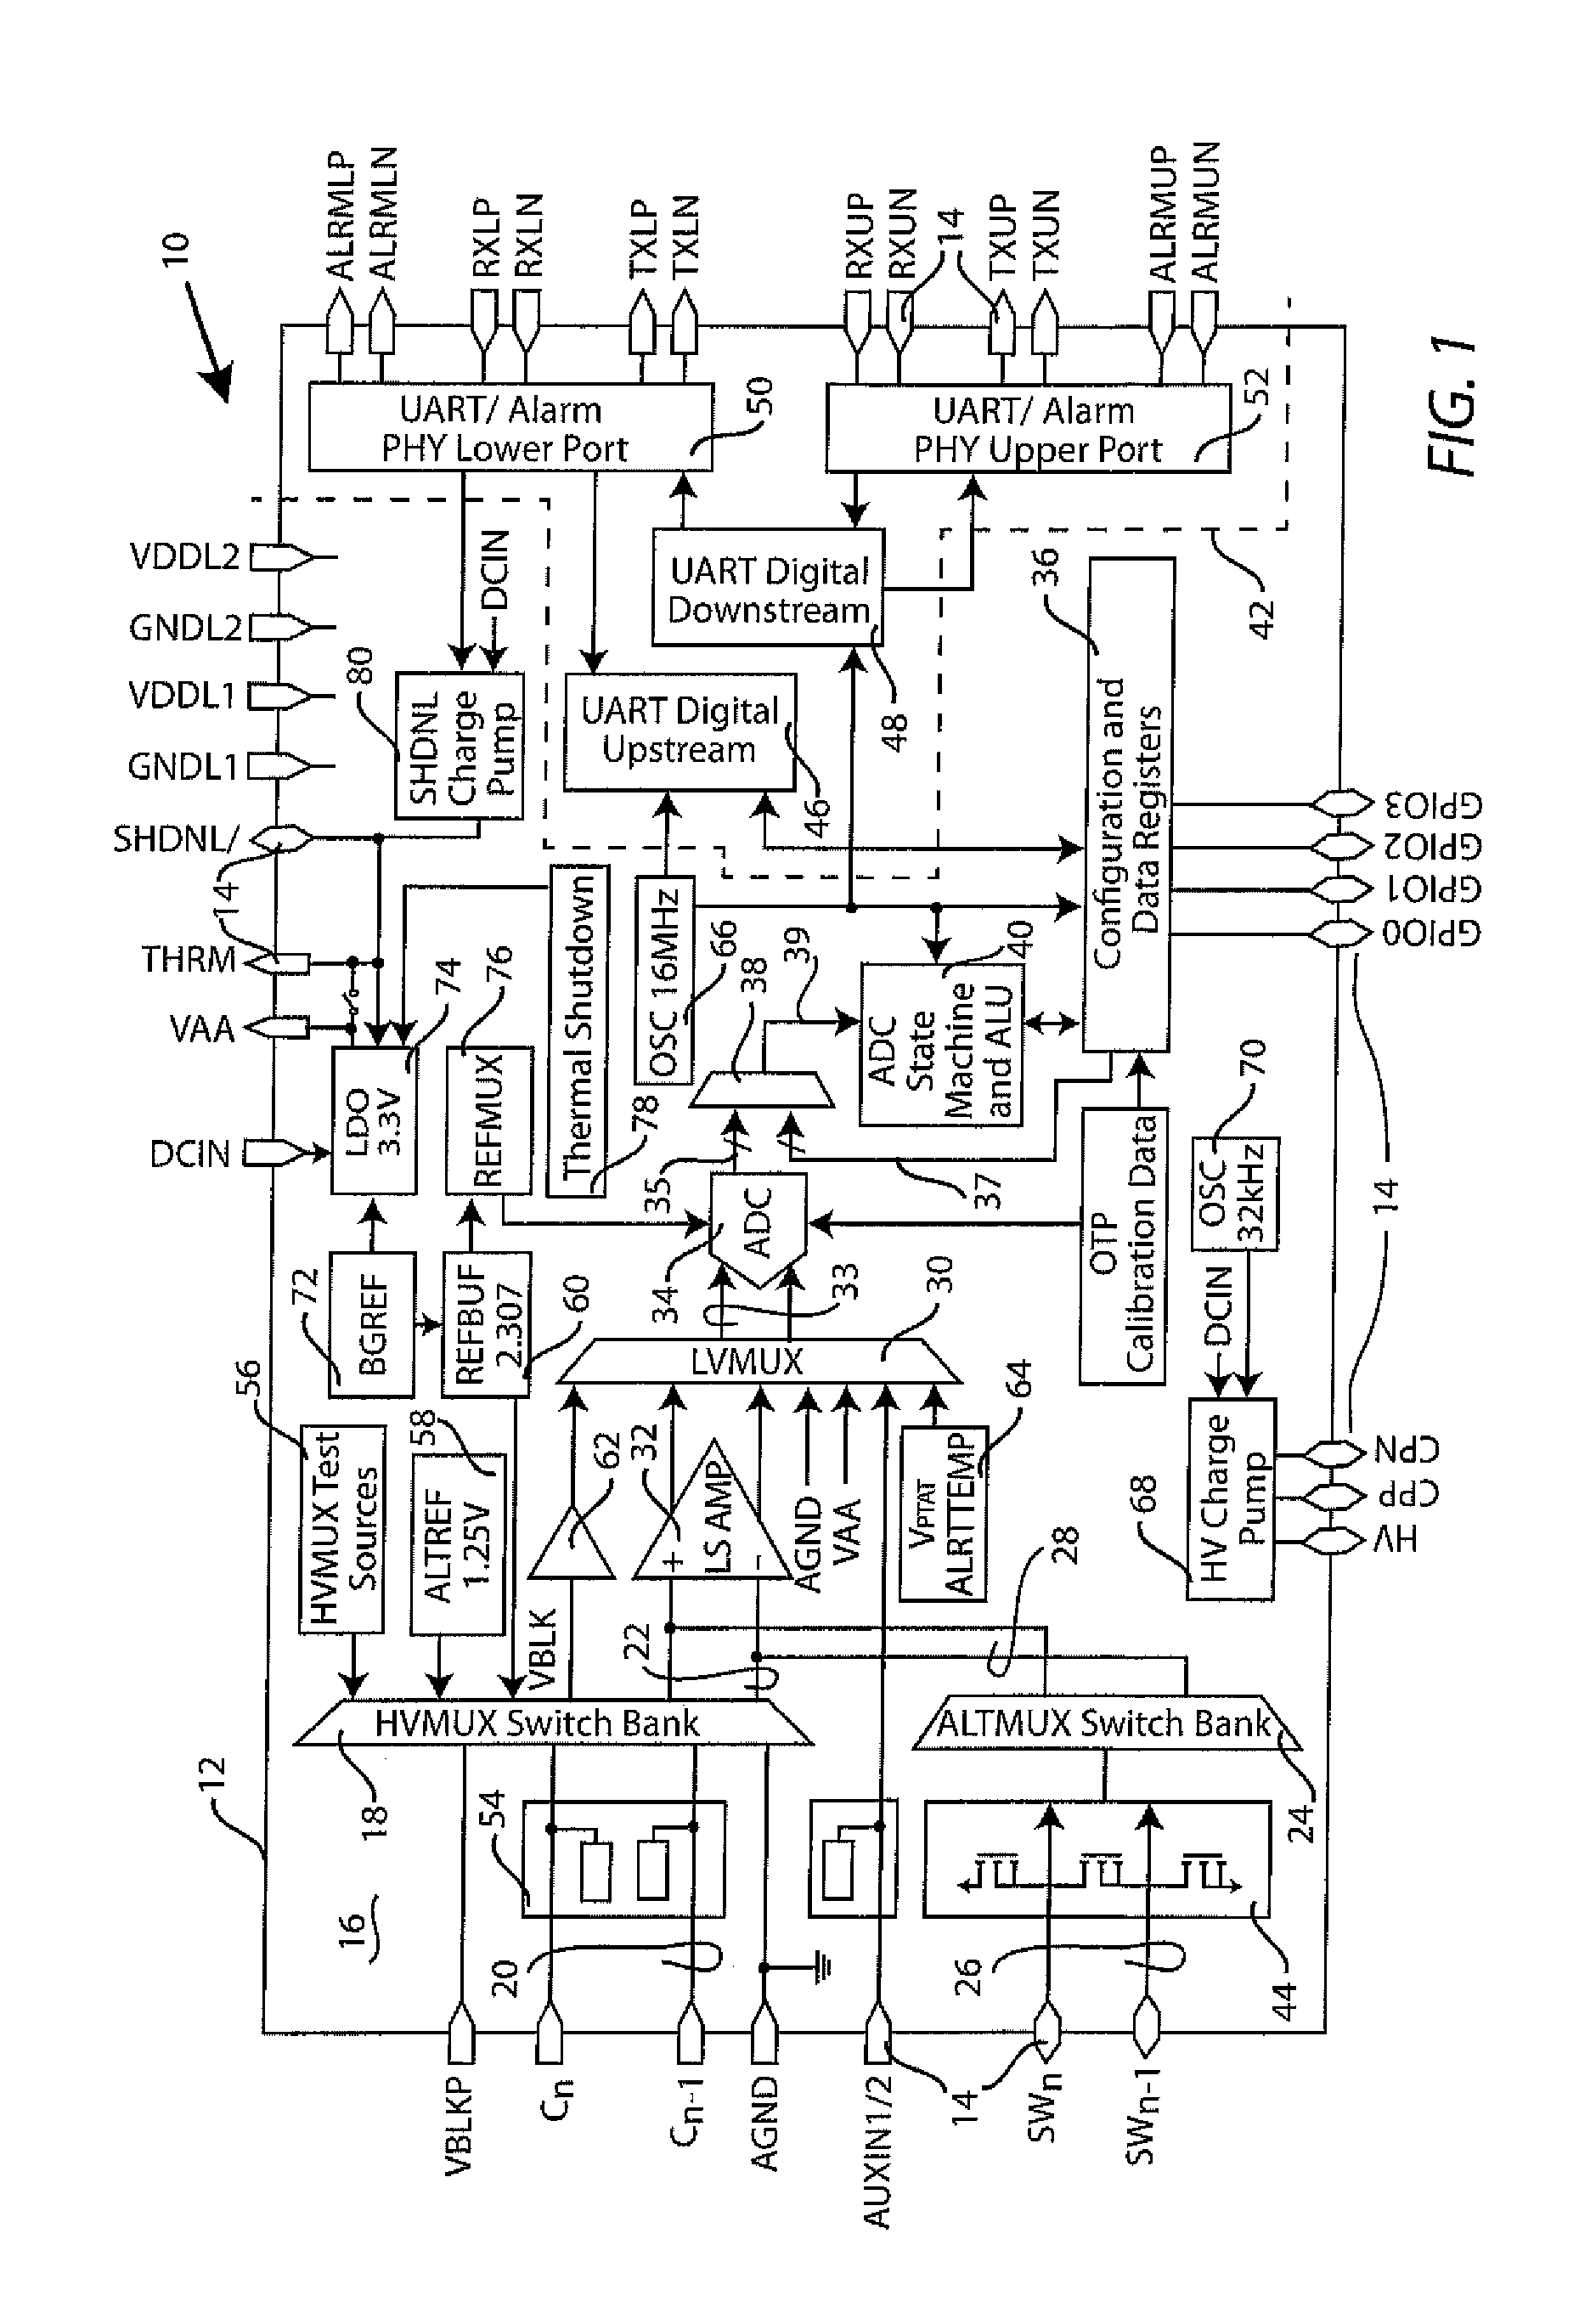 Integrated standard-compliant data acquisition device